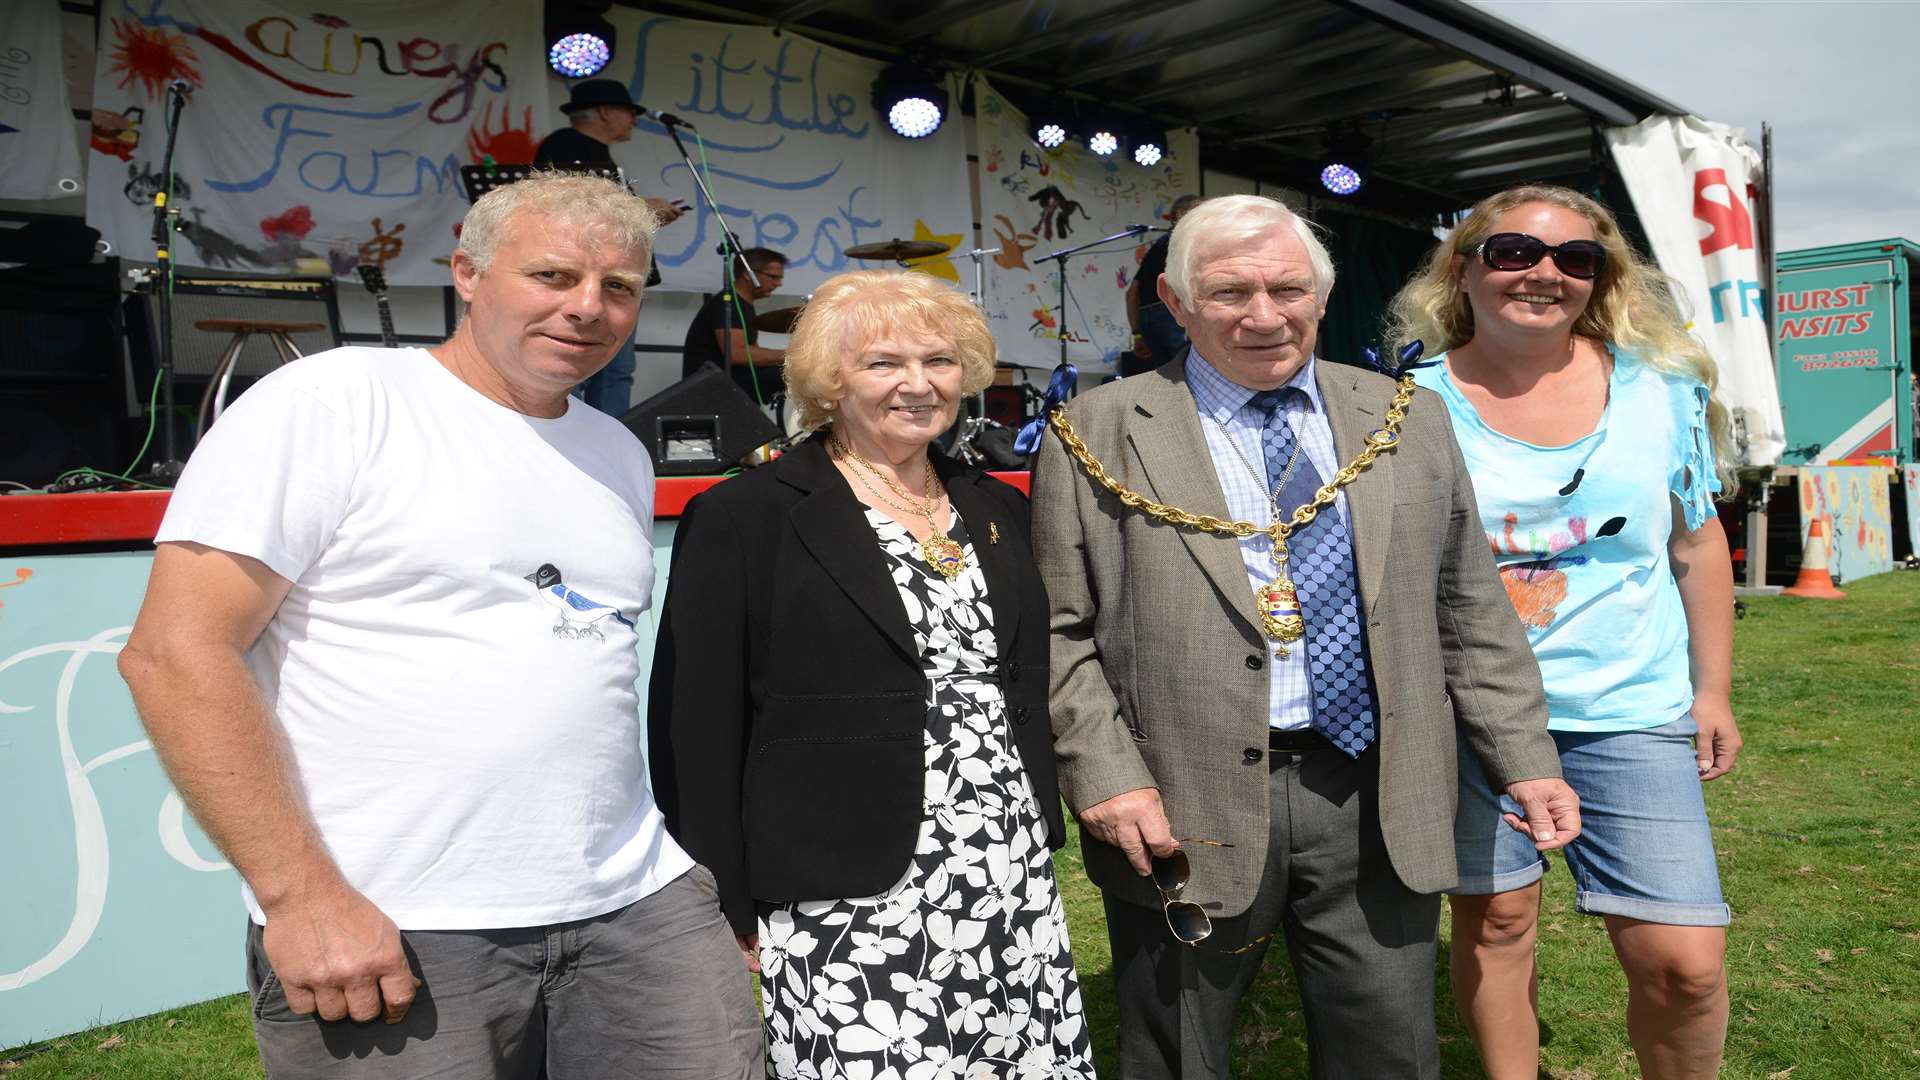 Organisers Toby Marsh (left) and Elaine Symes (right) are joined by Mayor and Mayoress of Maidstone Malcolm and Brenda Greer at Littlefest 2017